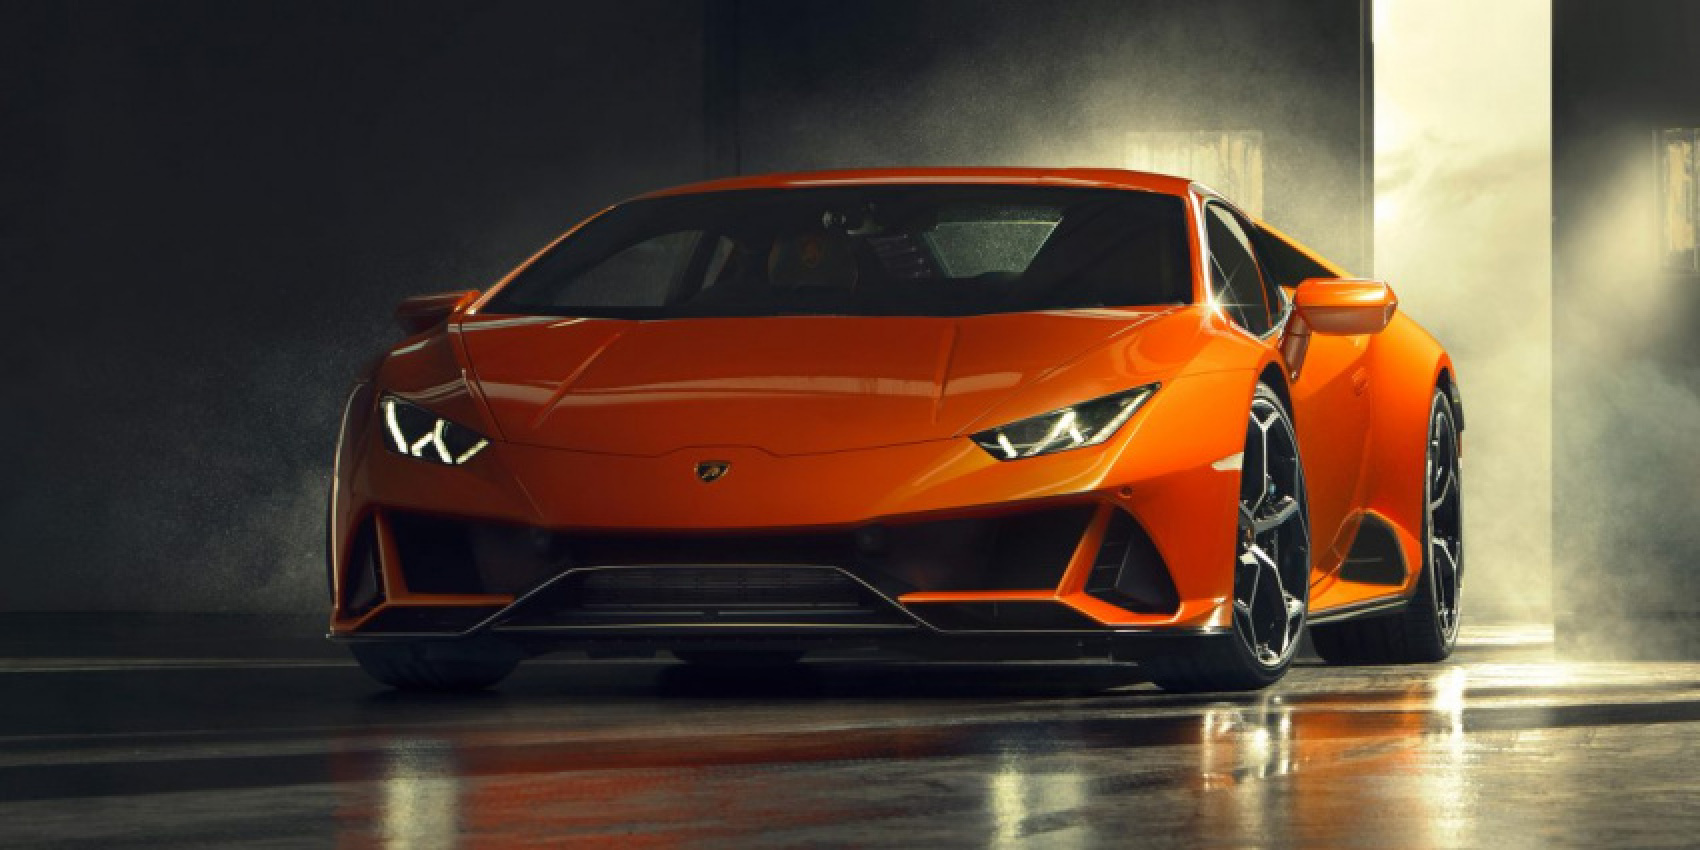 autos, cars, hypercar, lamborghini, huracan, lamborghini huracan, supercar, the lamborghini huracan may be the most reliable supercar on the market